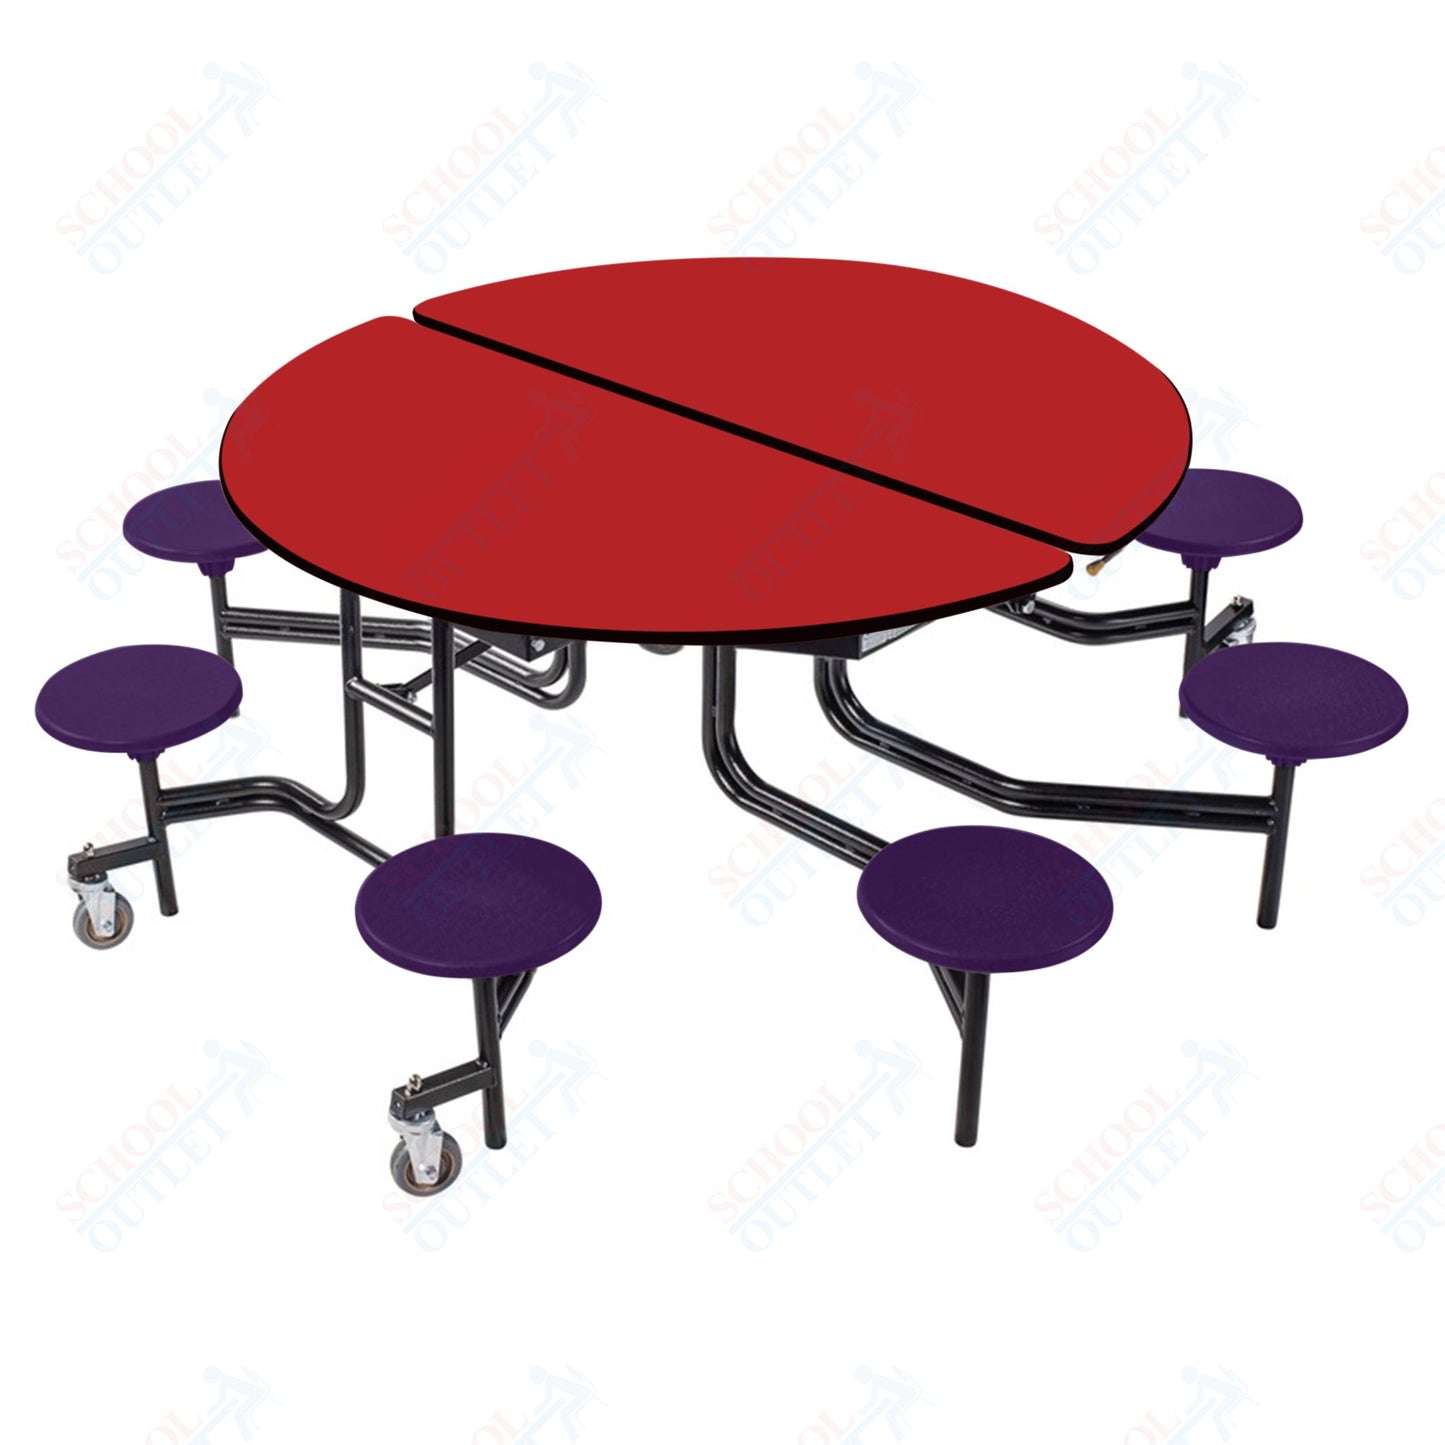 NPS 60" Round Mobile Cafeteria Table - 8 Stools - Plywood Core - T-Molding Edge - Black Powdercoated Frame